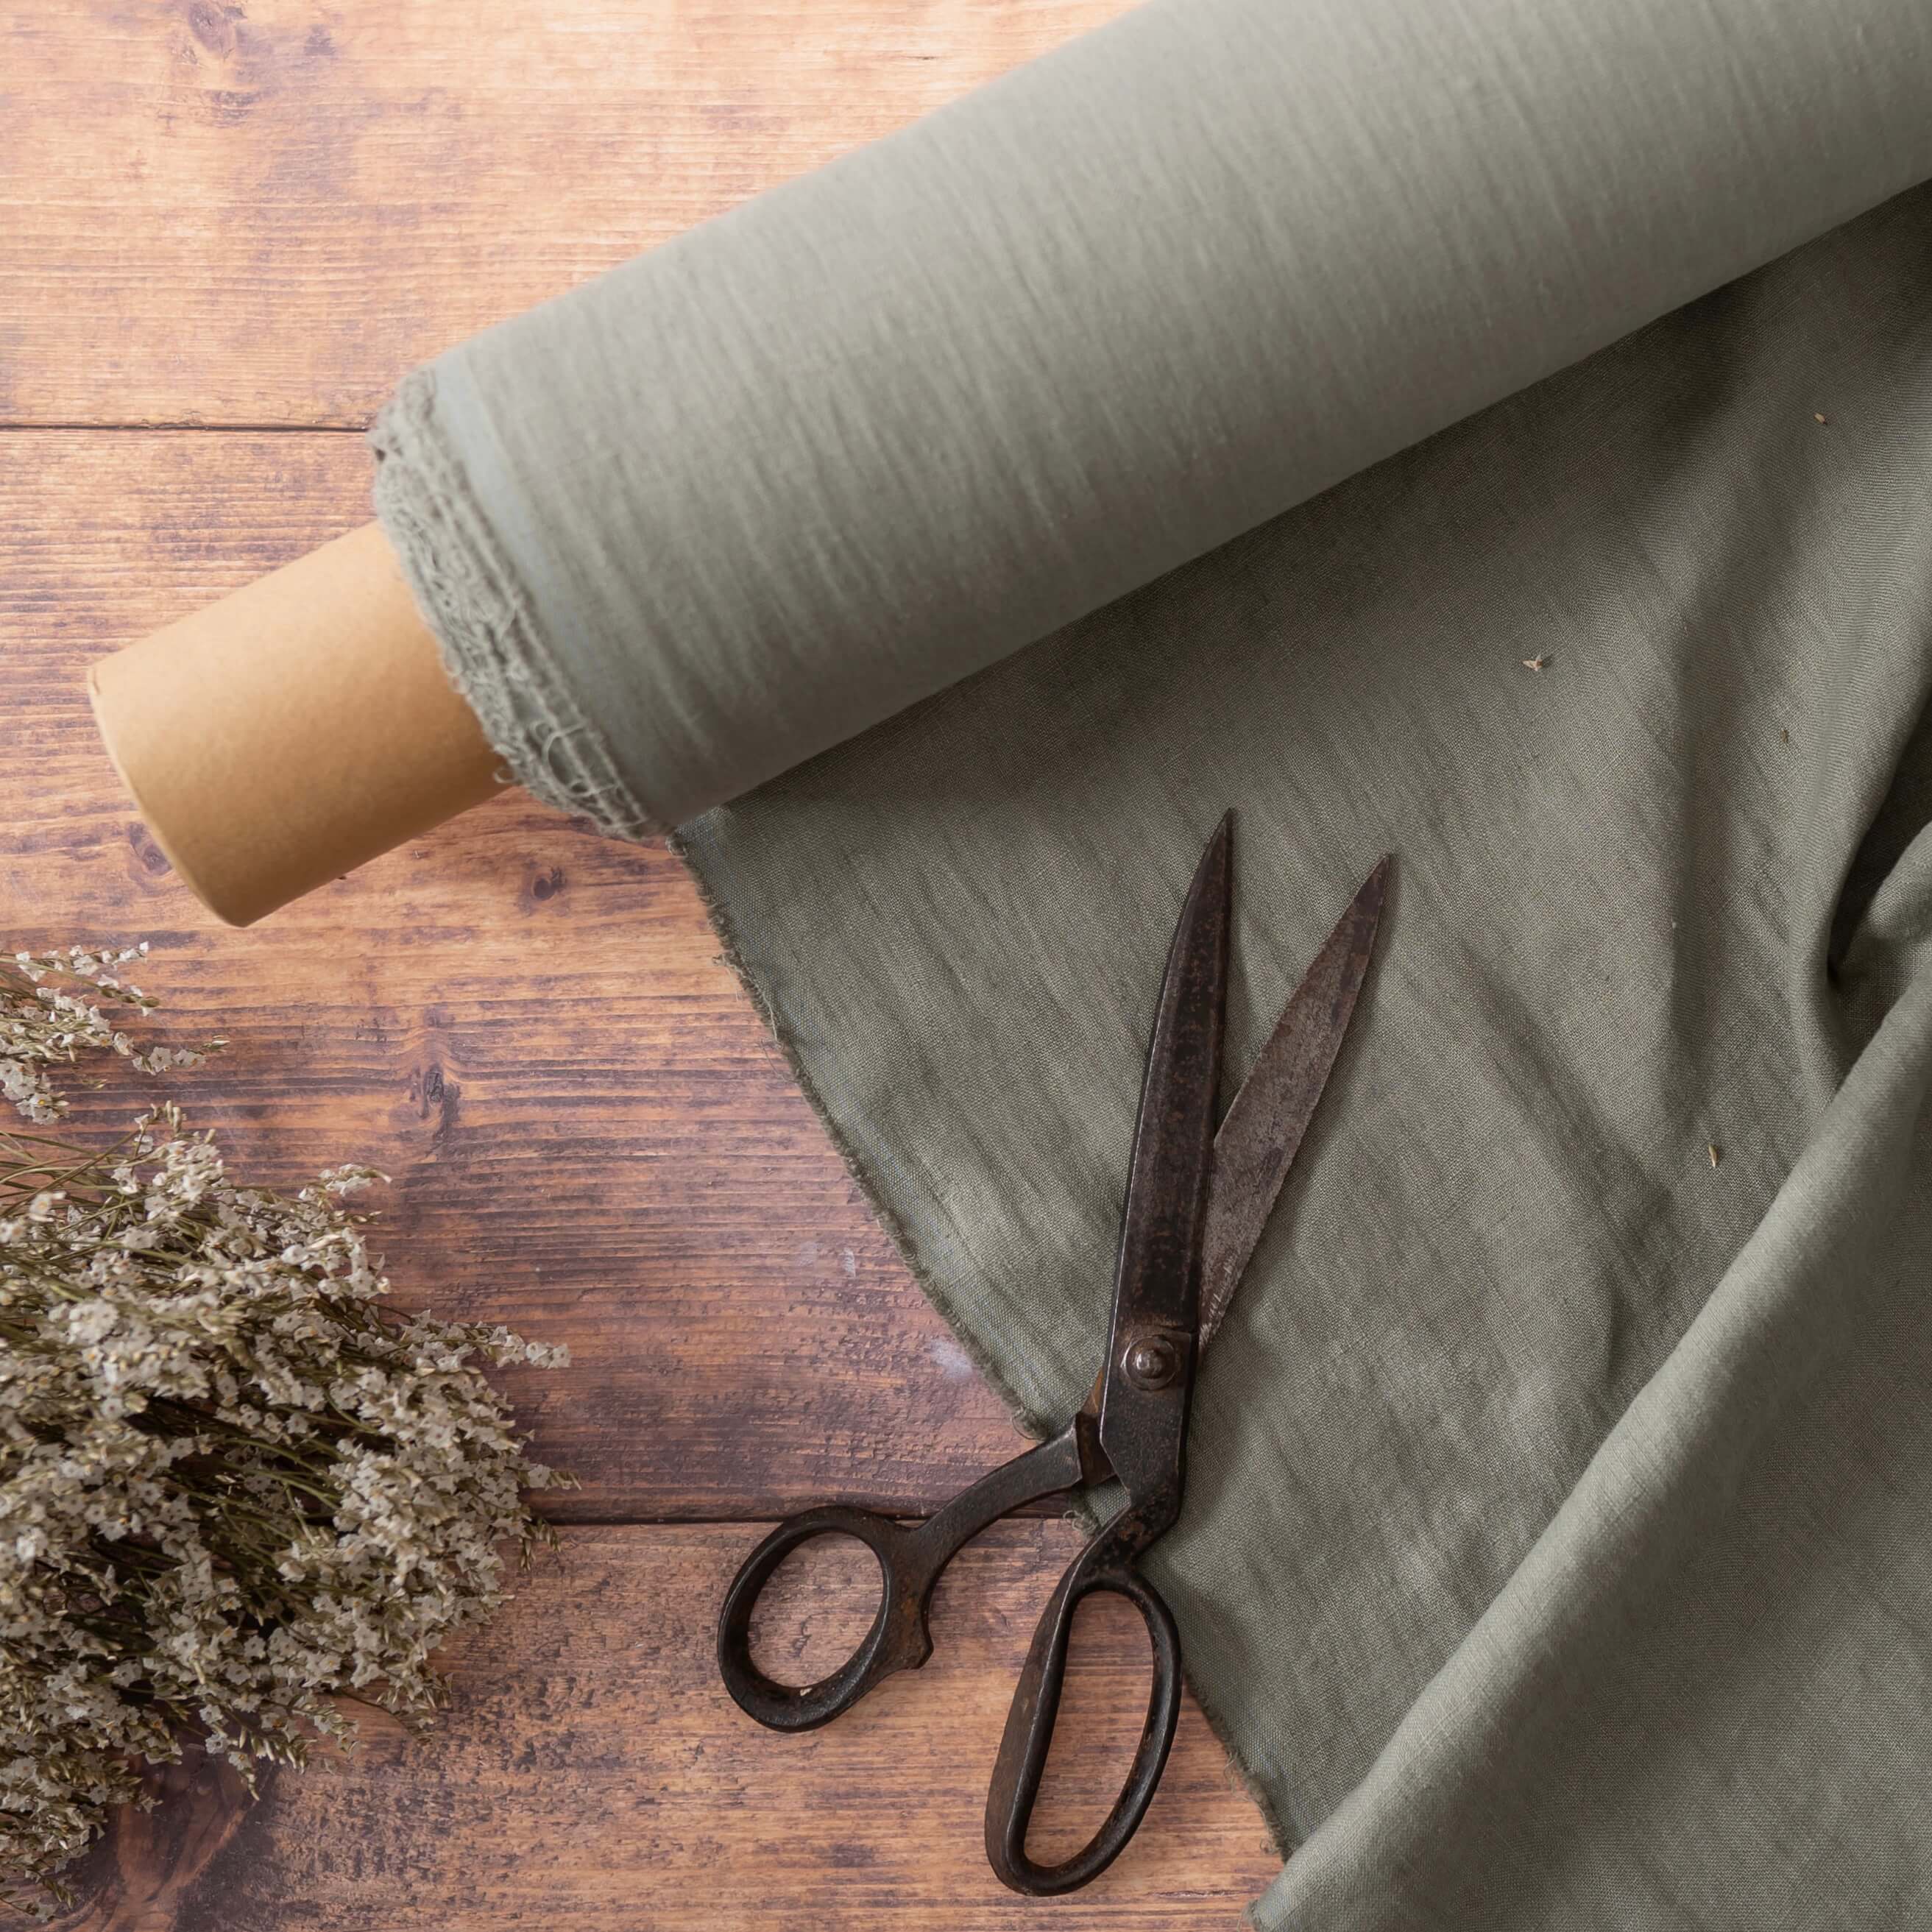 Washed Pure Dusty Sage Green Linen Fabric 205 g/m²